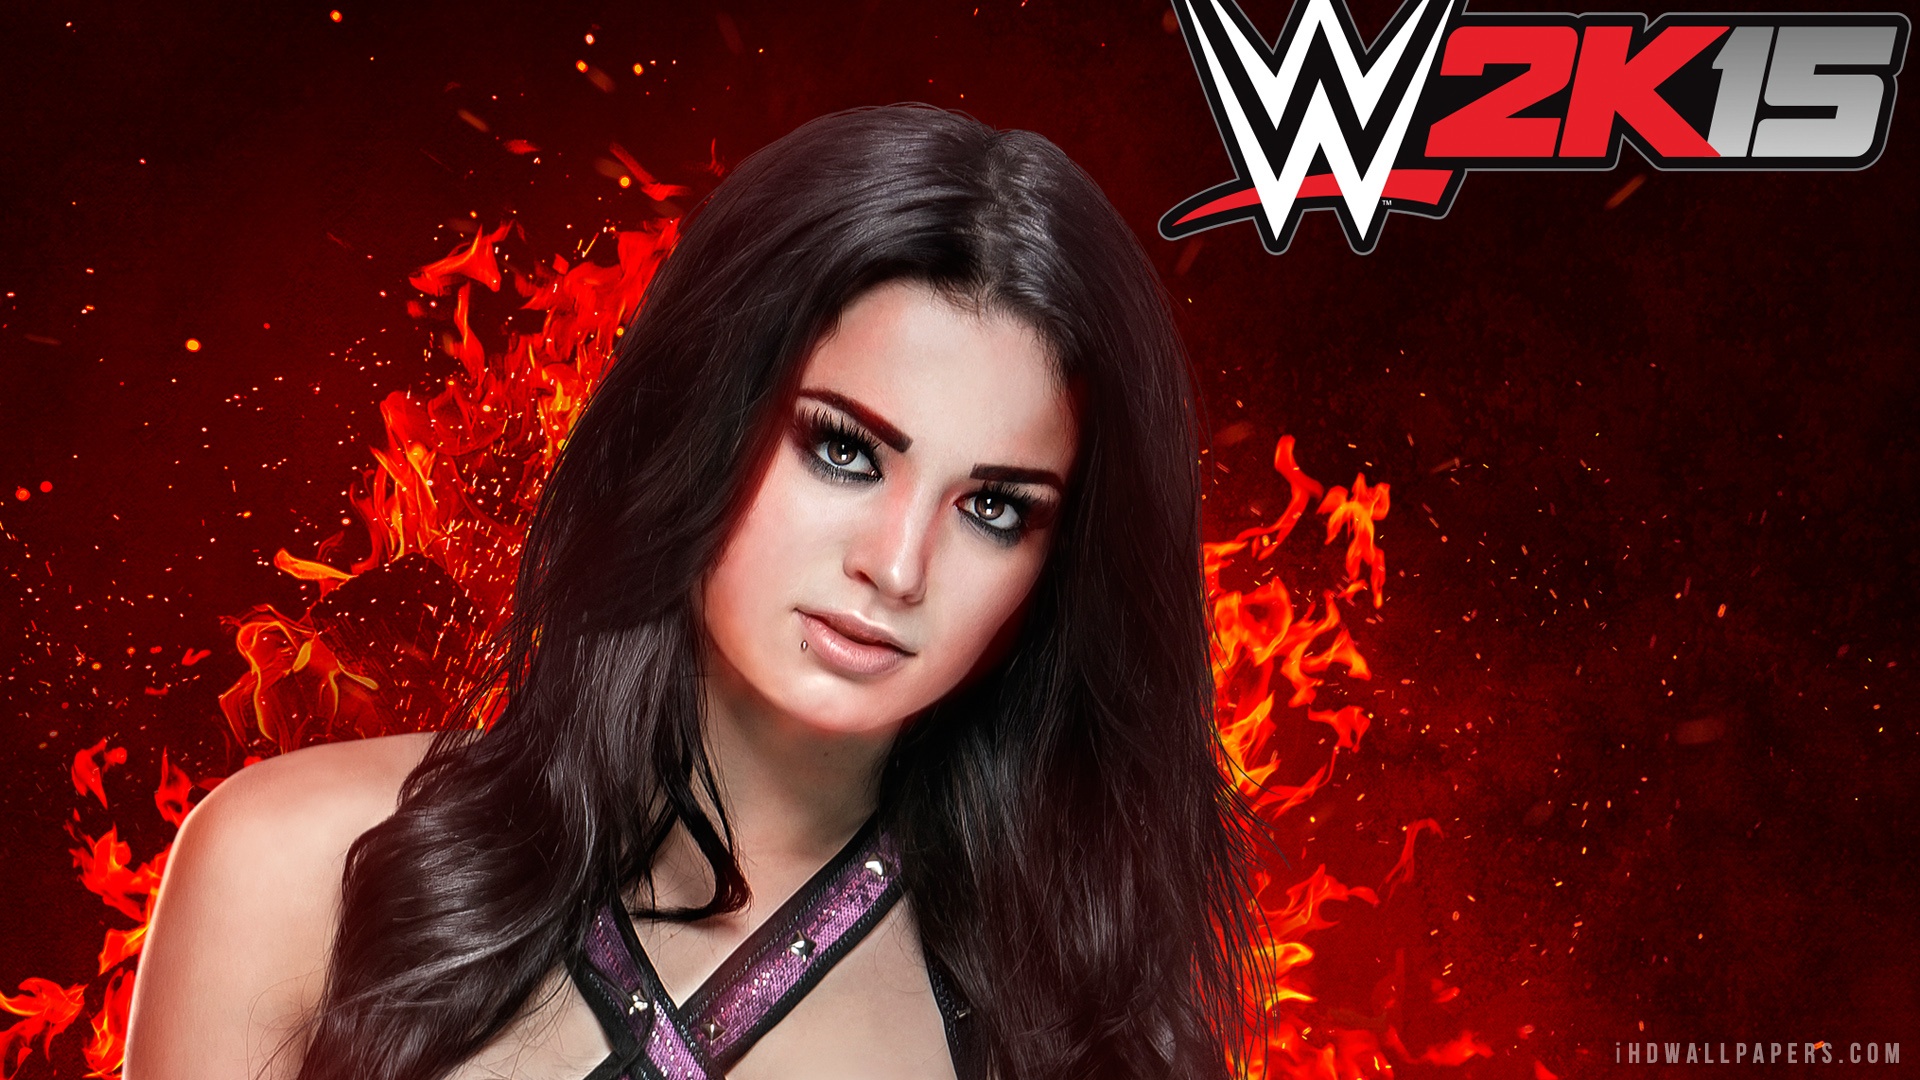 Wallpaper Nfl Awesome Of Paige Wwe Feb